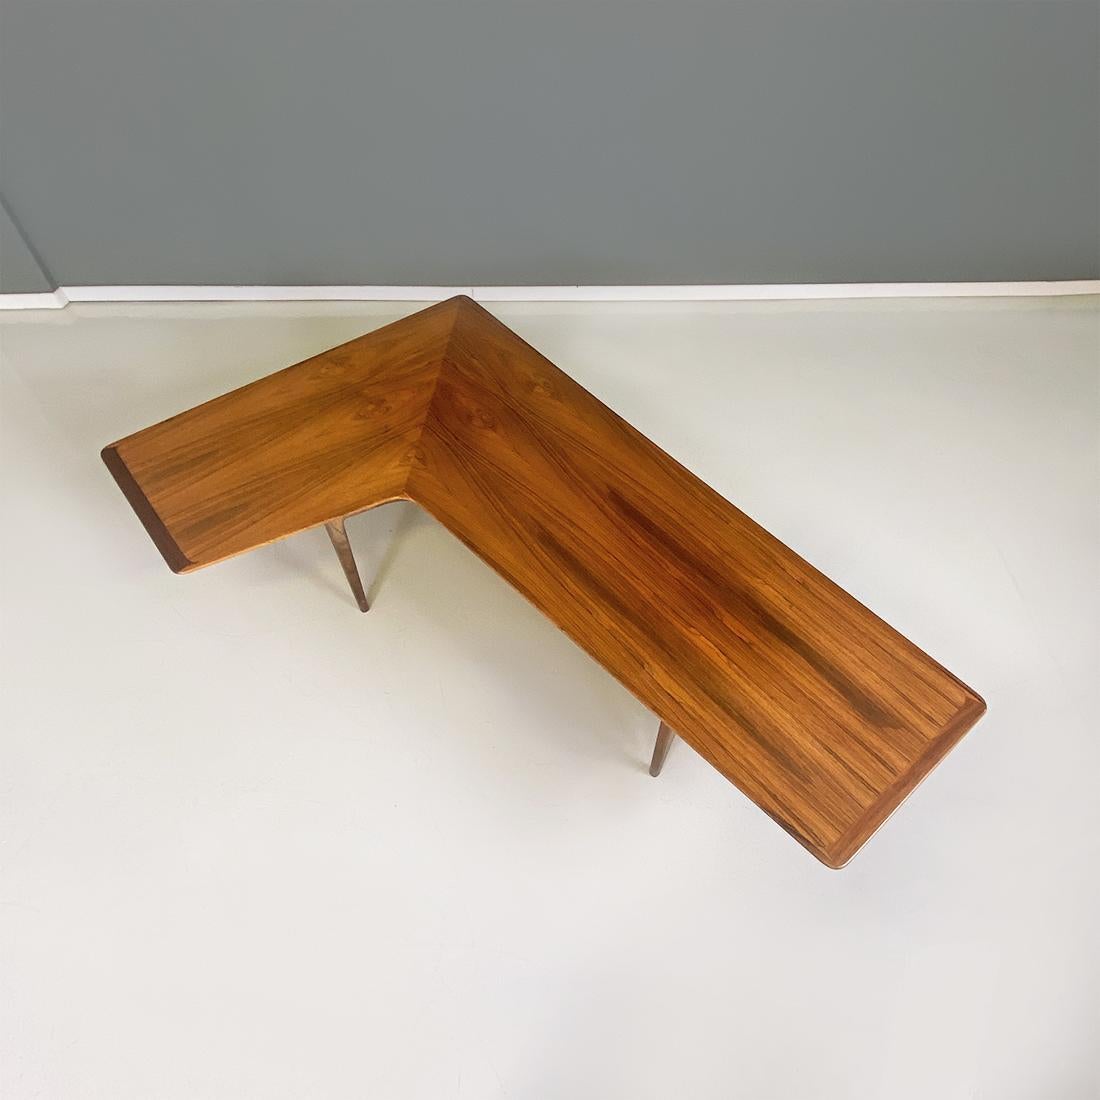 Italian Mid-Century Modern Solid Wood Coffee Table with a Boomerang Shape, 1960s 3